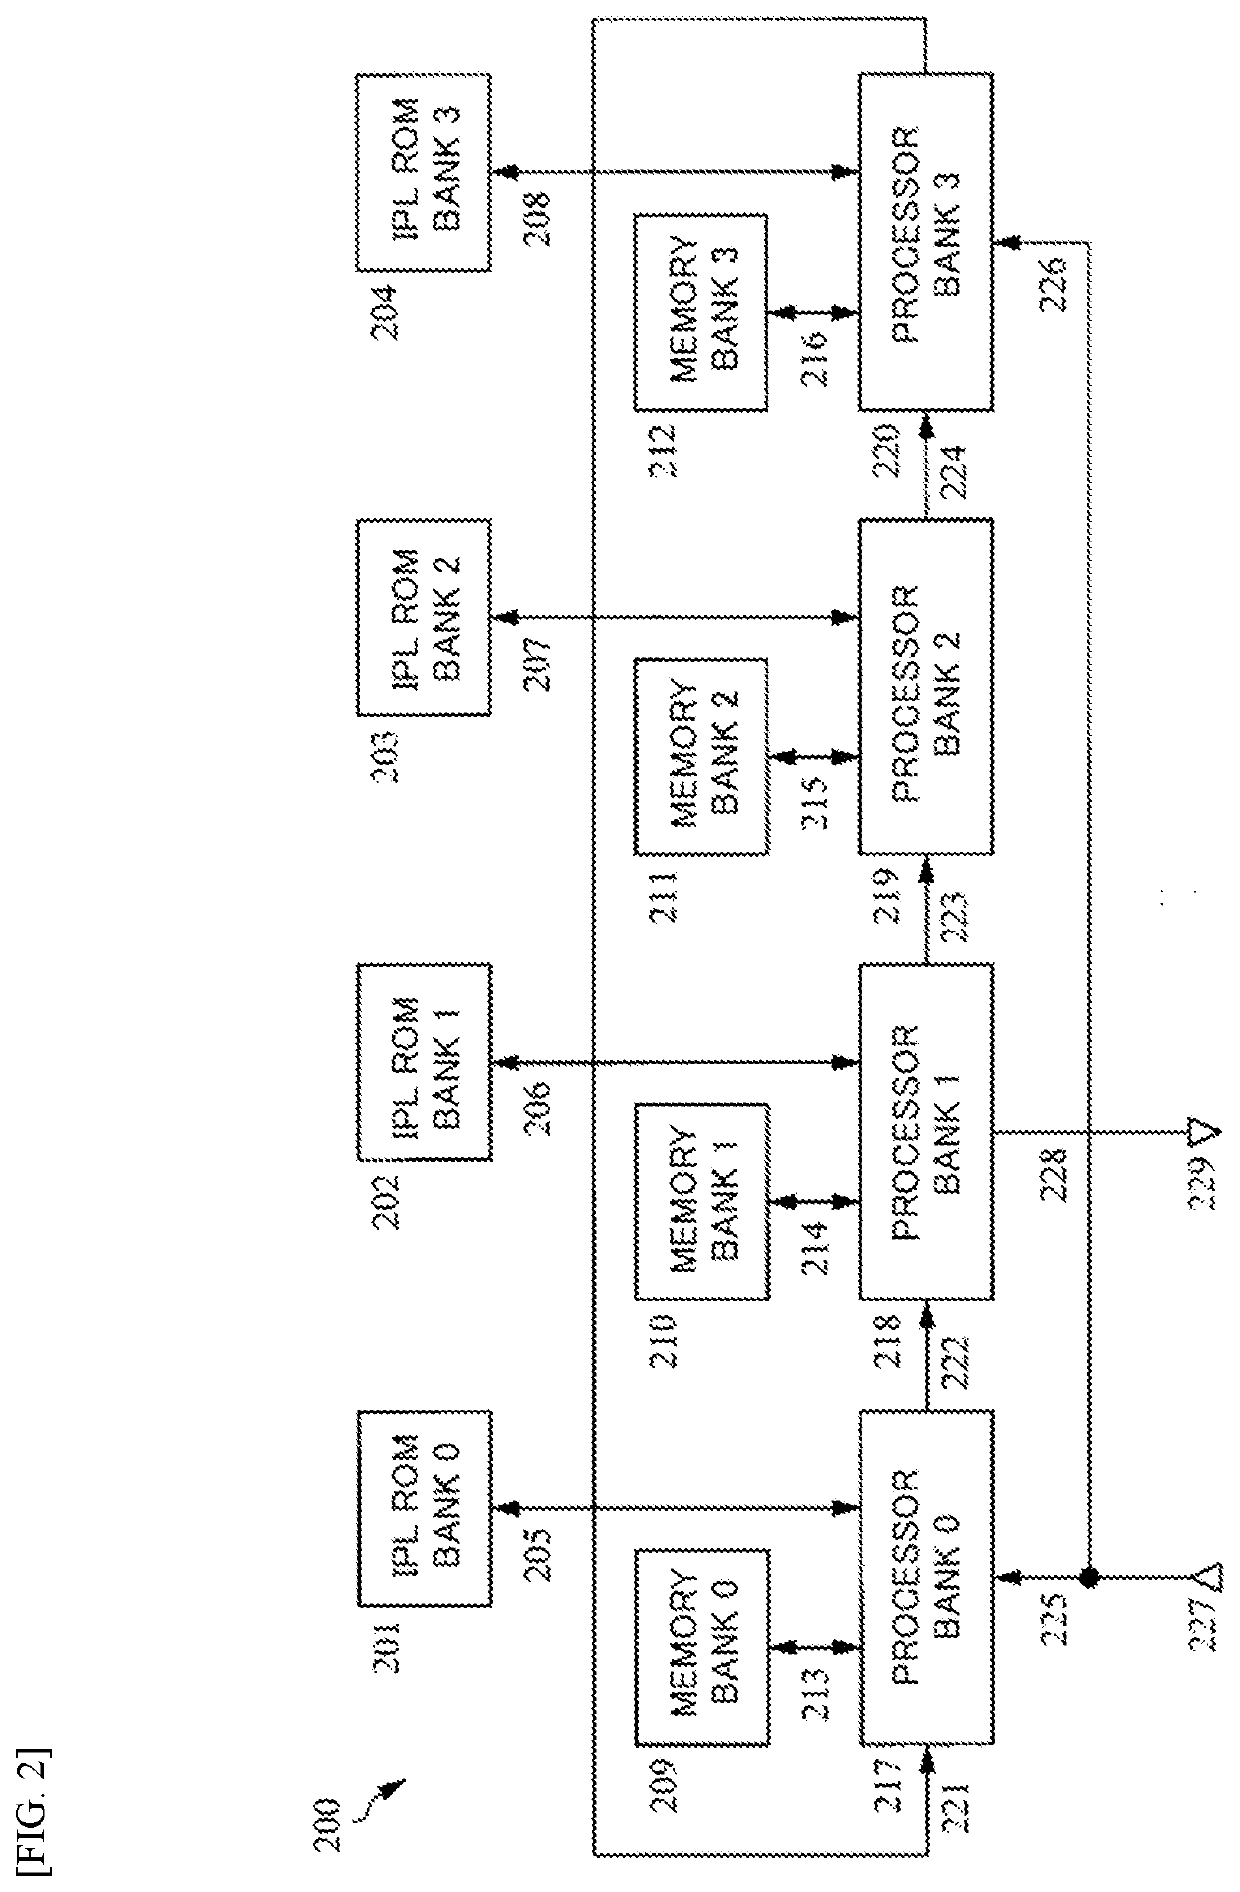 High-level synthesis multiprocessor system and the like